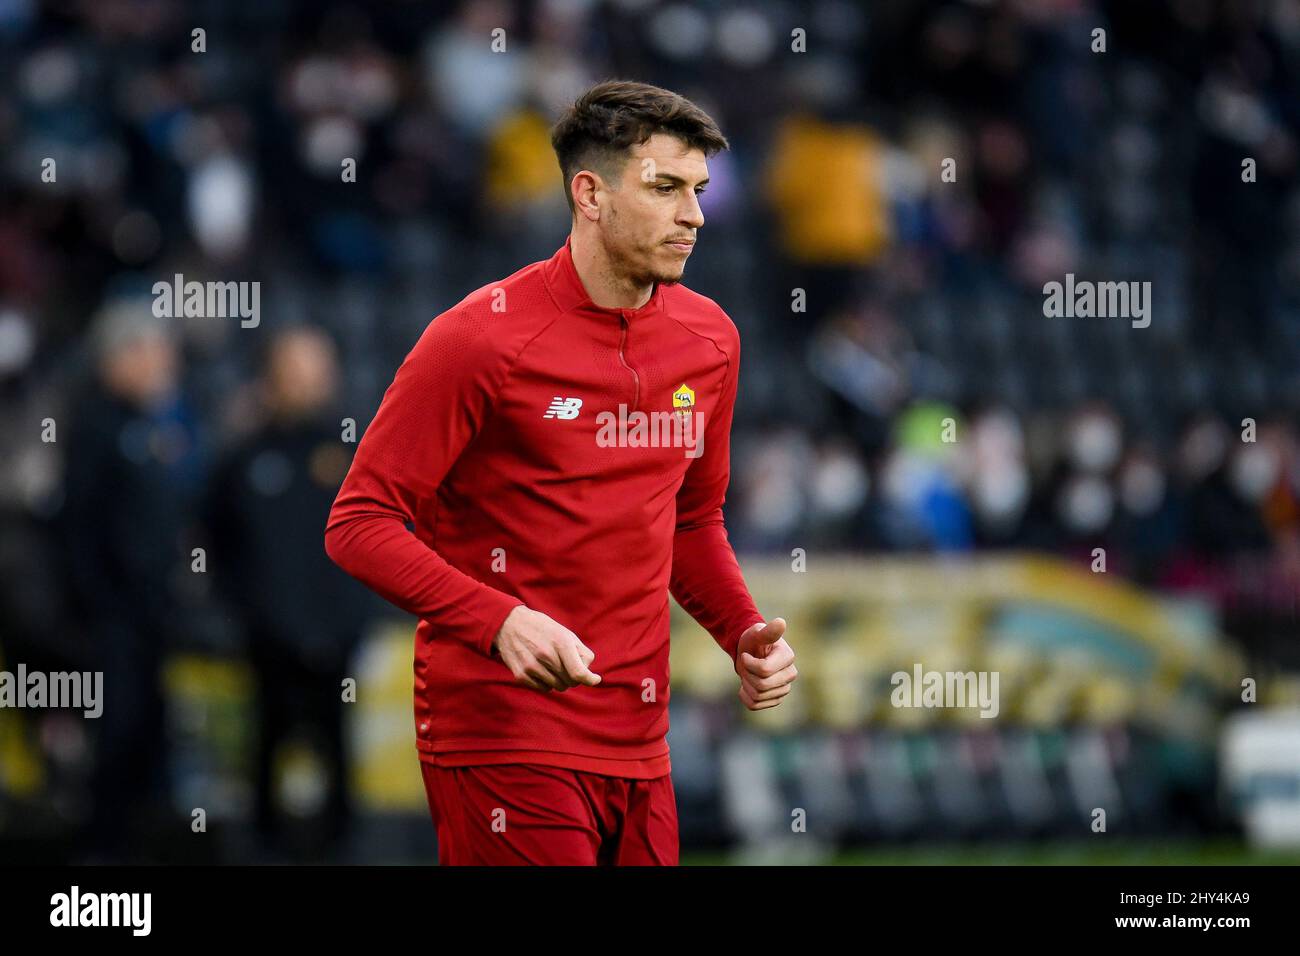 Udine, Italy. 13th Mar, 2022. Roma's Roger Ibanez da Silva portrait during Udinese Calcio vs AS Roma, italian soccer Serie A match in Udine, Italy, March 13 2022 Credit: Independent Photo Agency/Alamy Live News Stock Photo